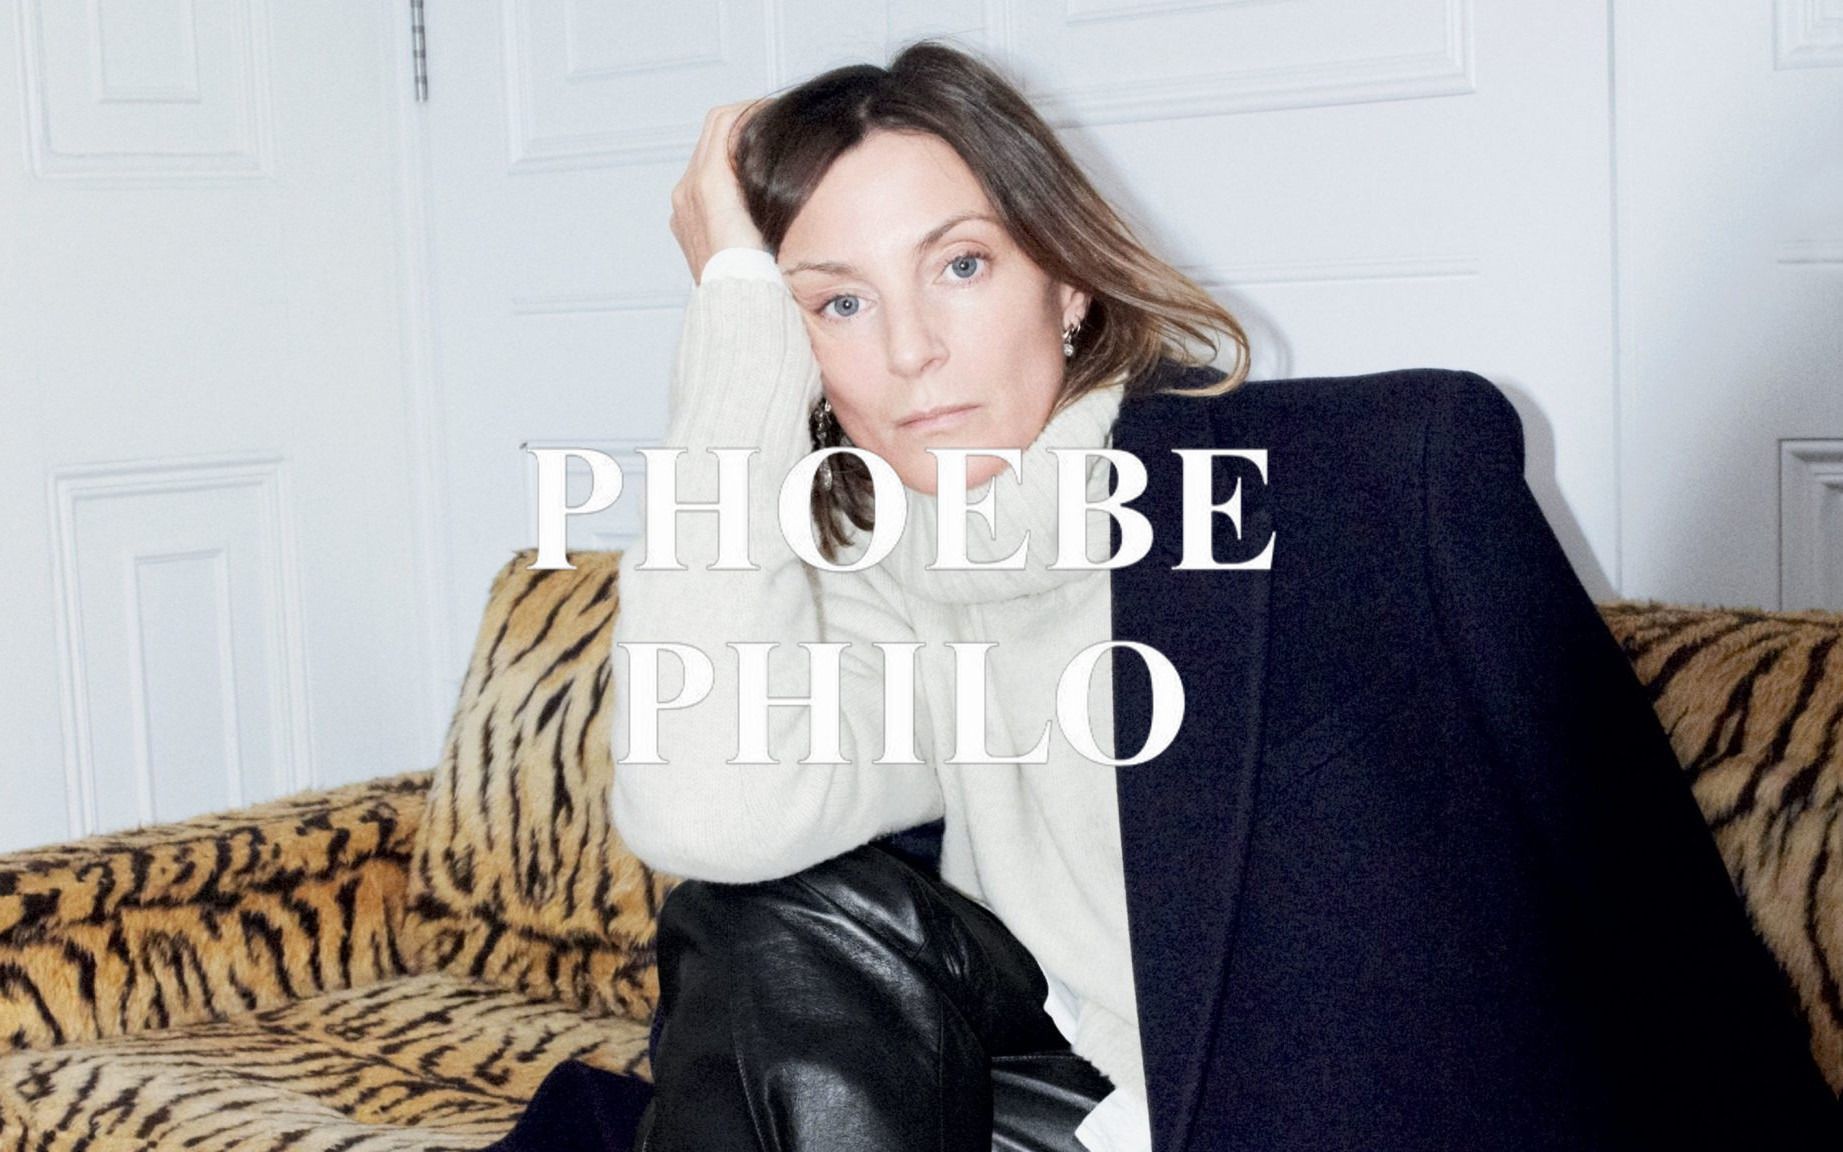 Tomorrow is 'Phoebe Philo' day – and fashion fans are already setting their  alarms